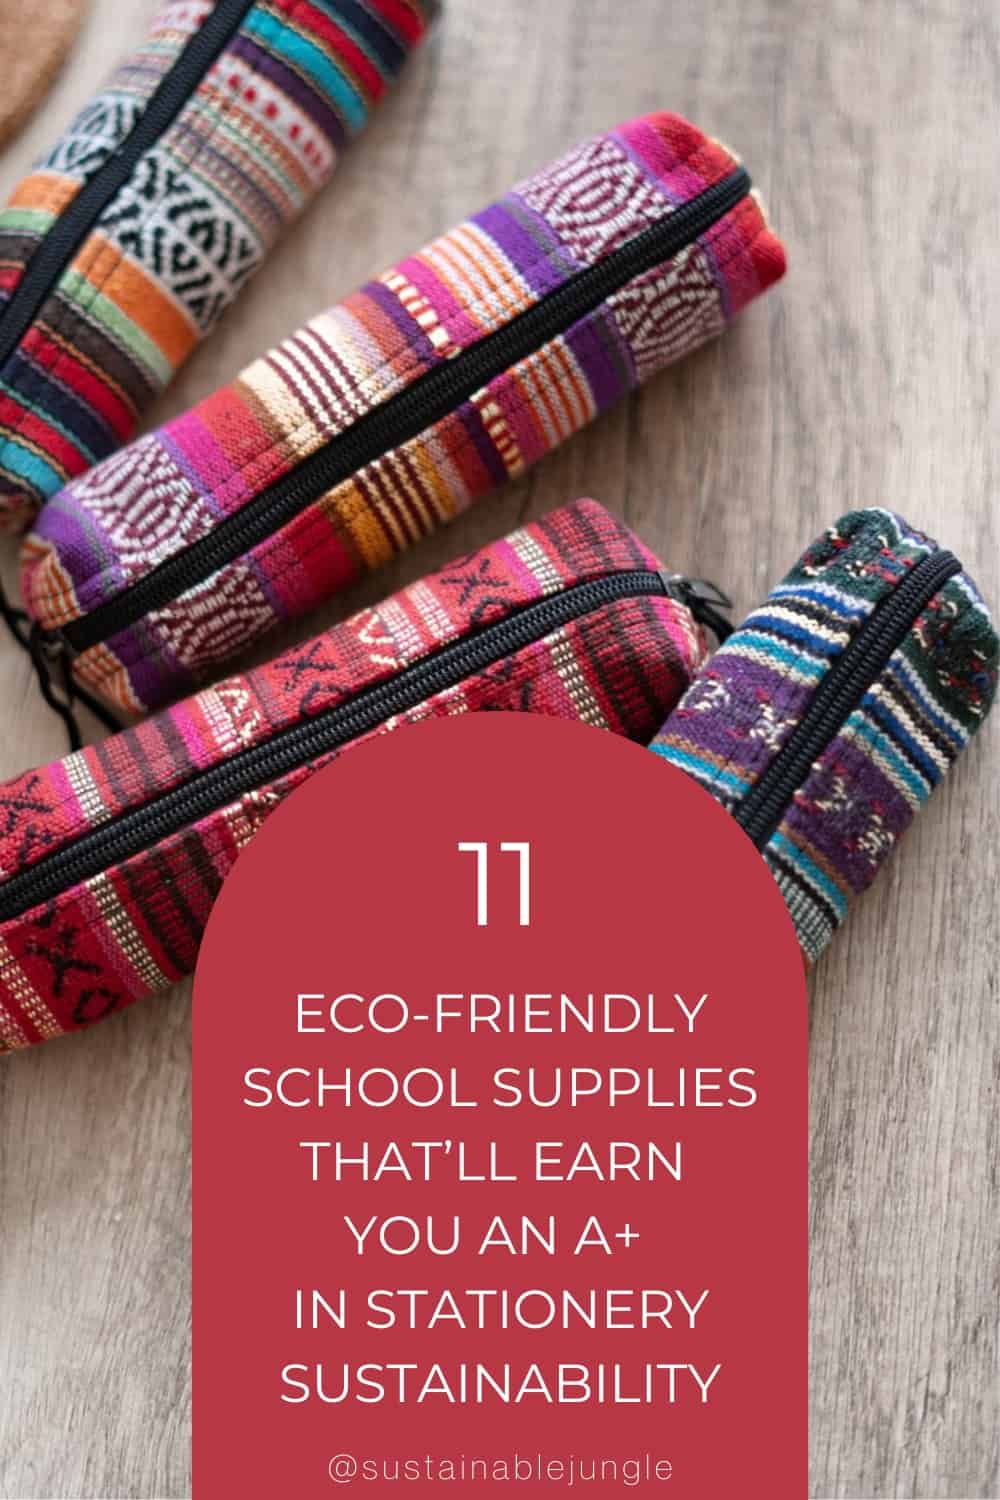 11 Eco-Friendly School Supplies That’ll Earn You An A+ In Stationery Sustainability Image by YeetiArts #ecofriendlyschoolsupplies #ecofriendlystationery #sustainableschoolsupplies #sustainablebacktoschoolsupplies #sustainablestationerybrands #sustainablejungle